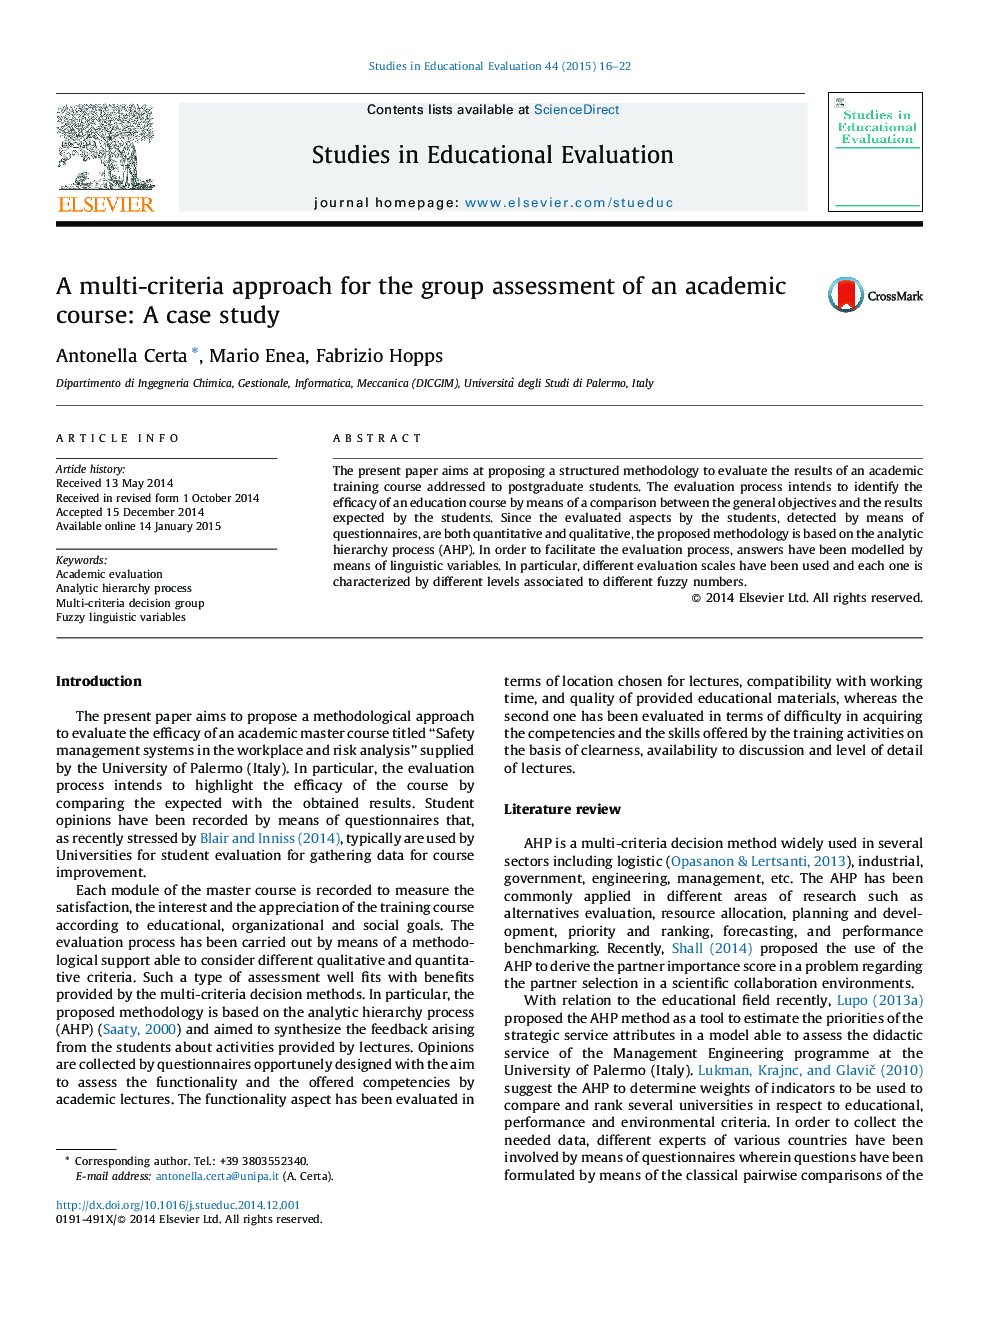 A multi-criteria approach for the group assessment of an academic course: A case study